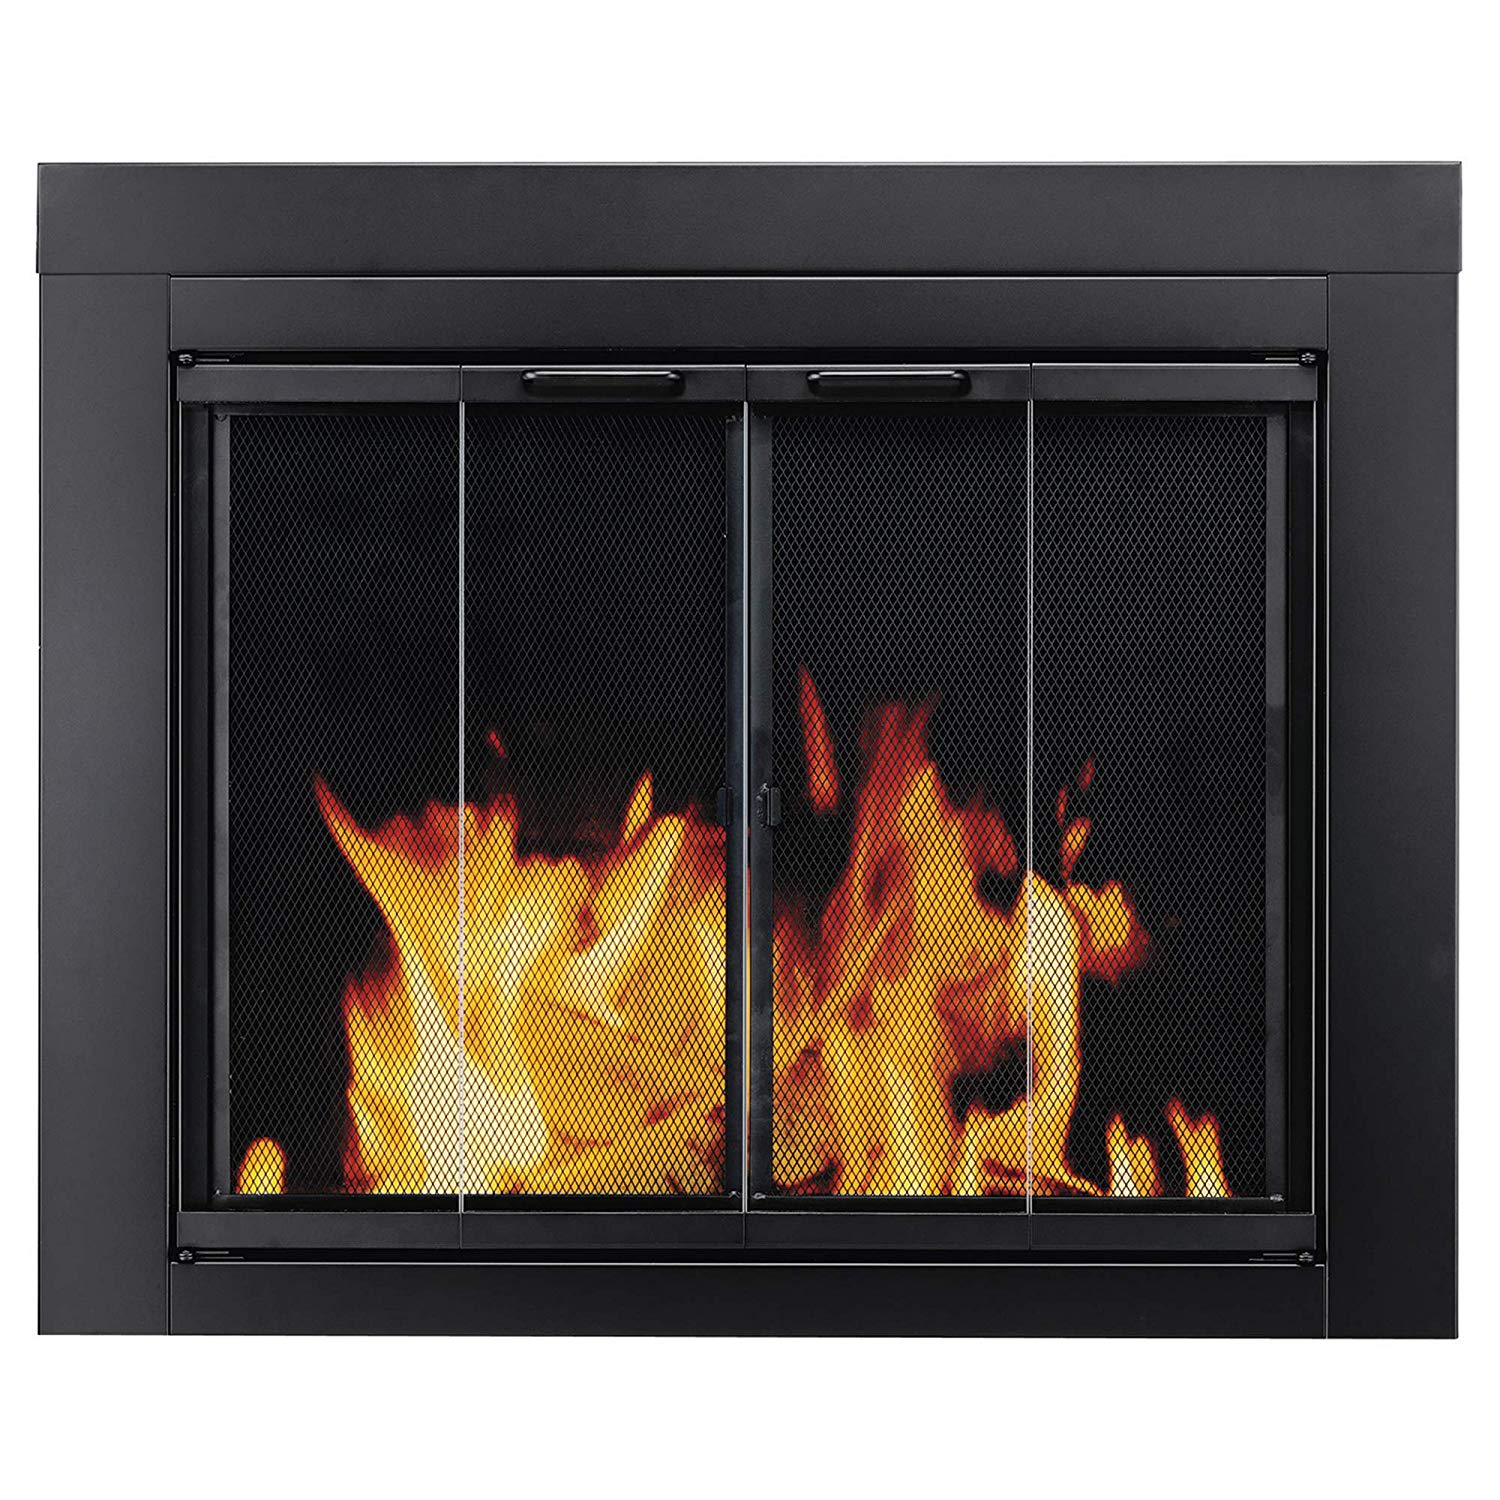 How to Heat Your House with A Fireplace New Pleasant Hearth at 1000 ascot Fireplace Glass Door Black Small